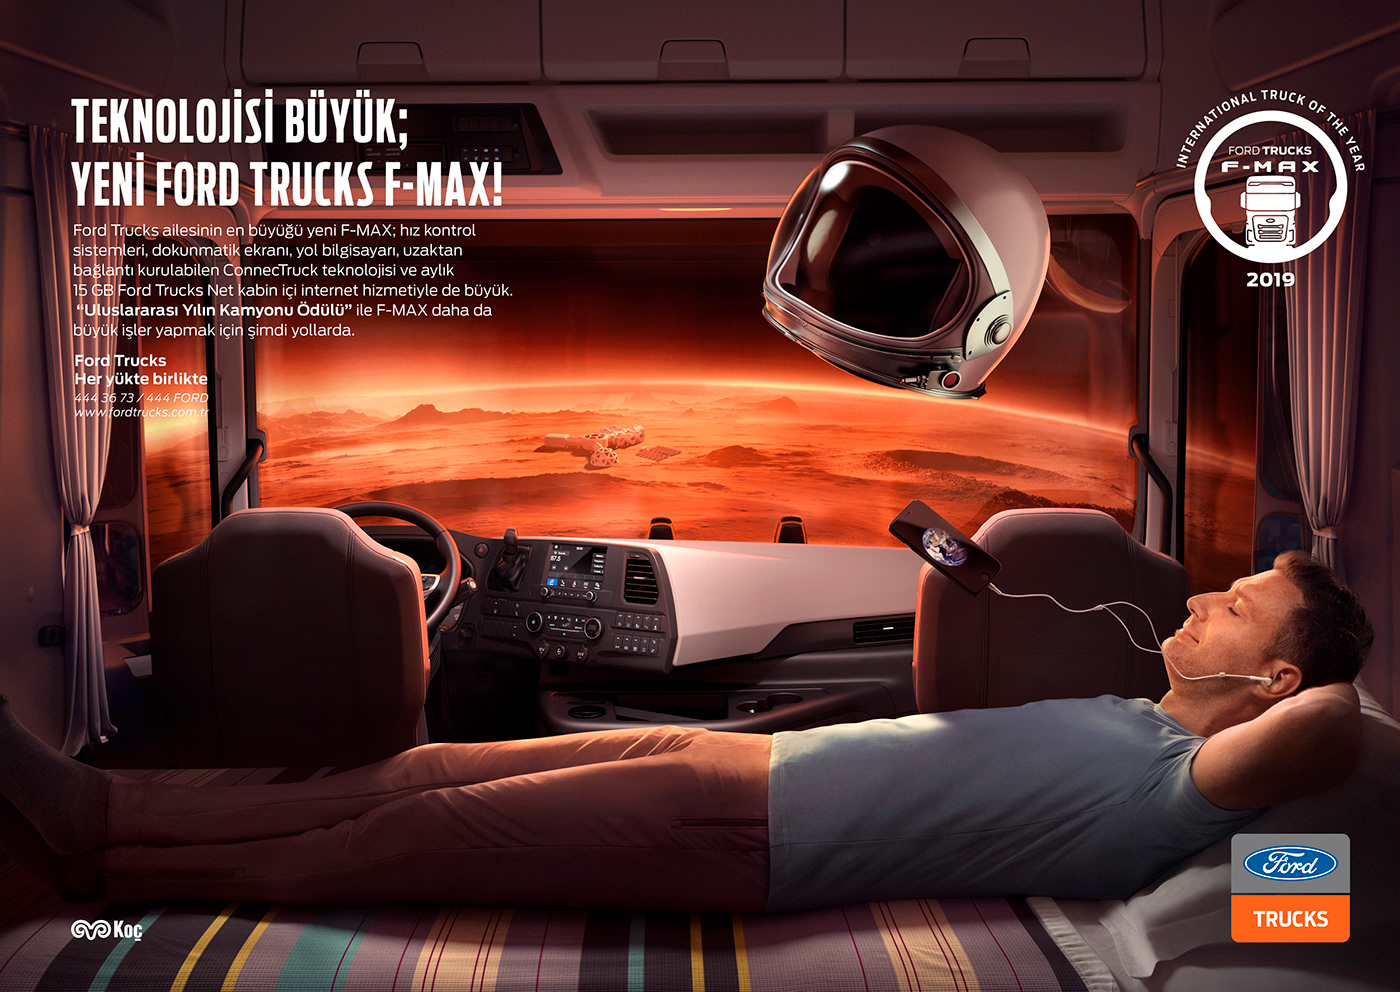 3D retouch car Truck Ford automotive   mars alld Space  Photography 